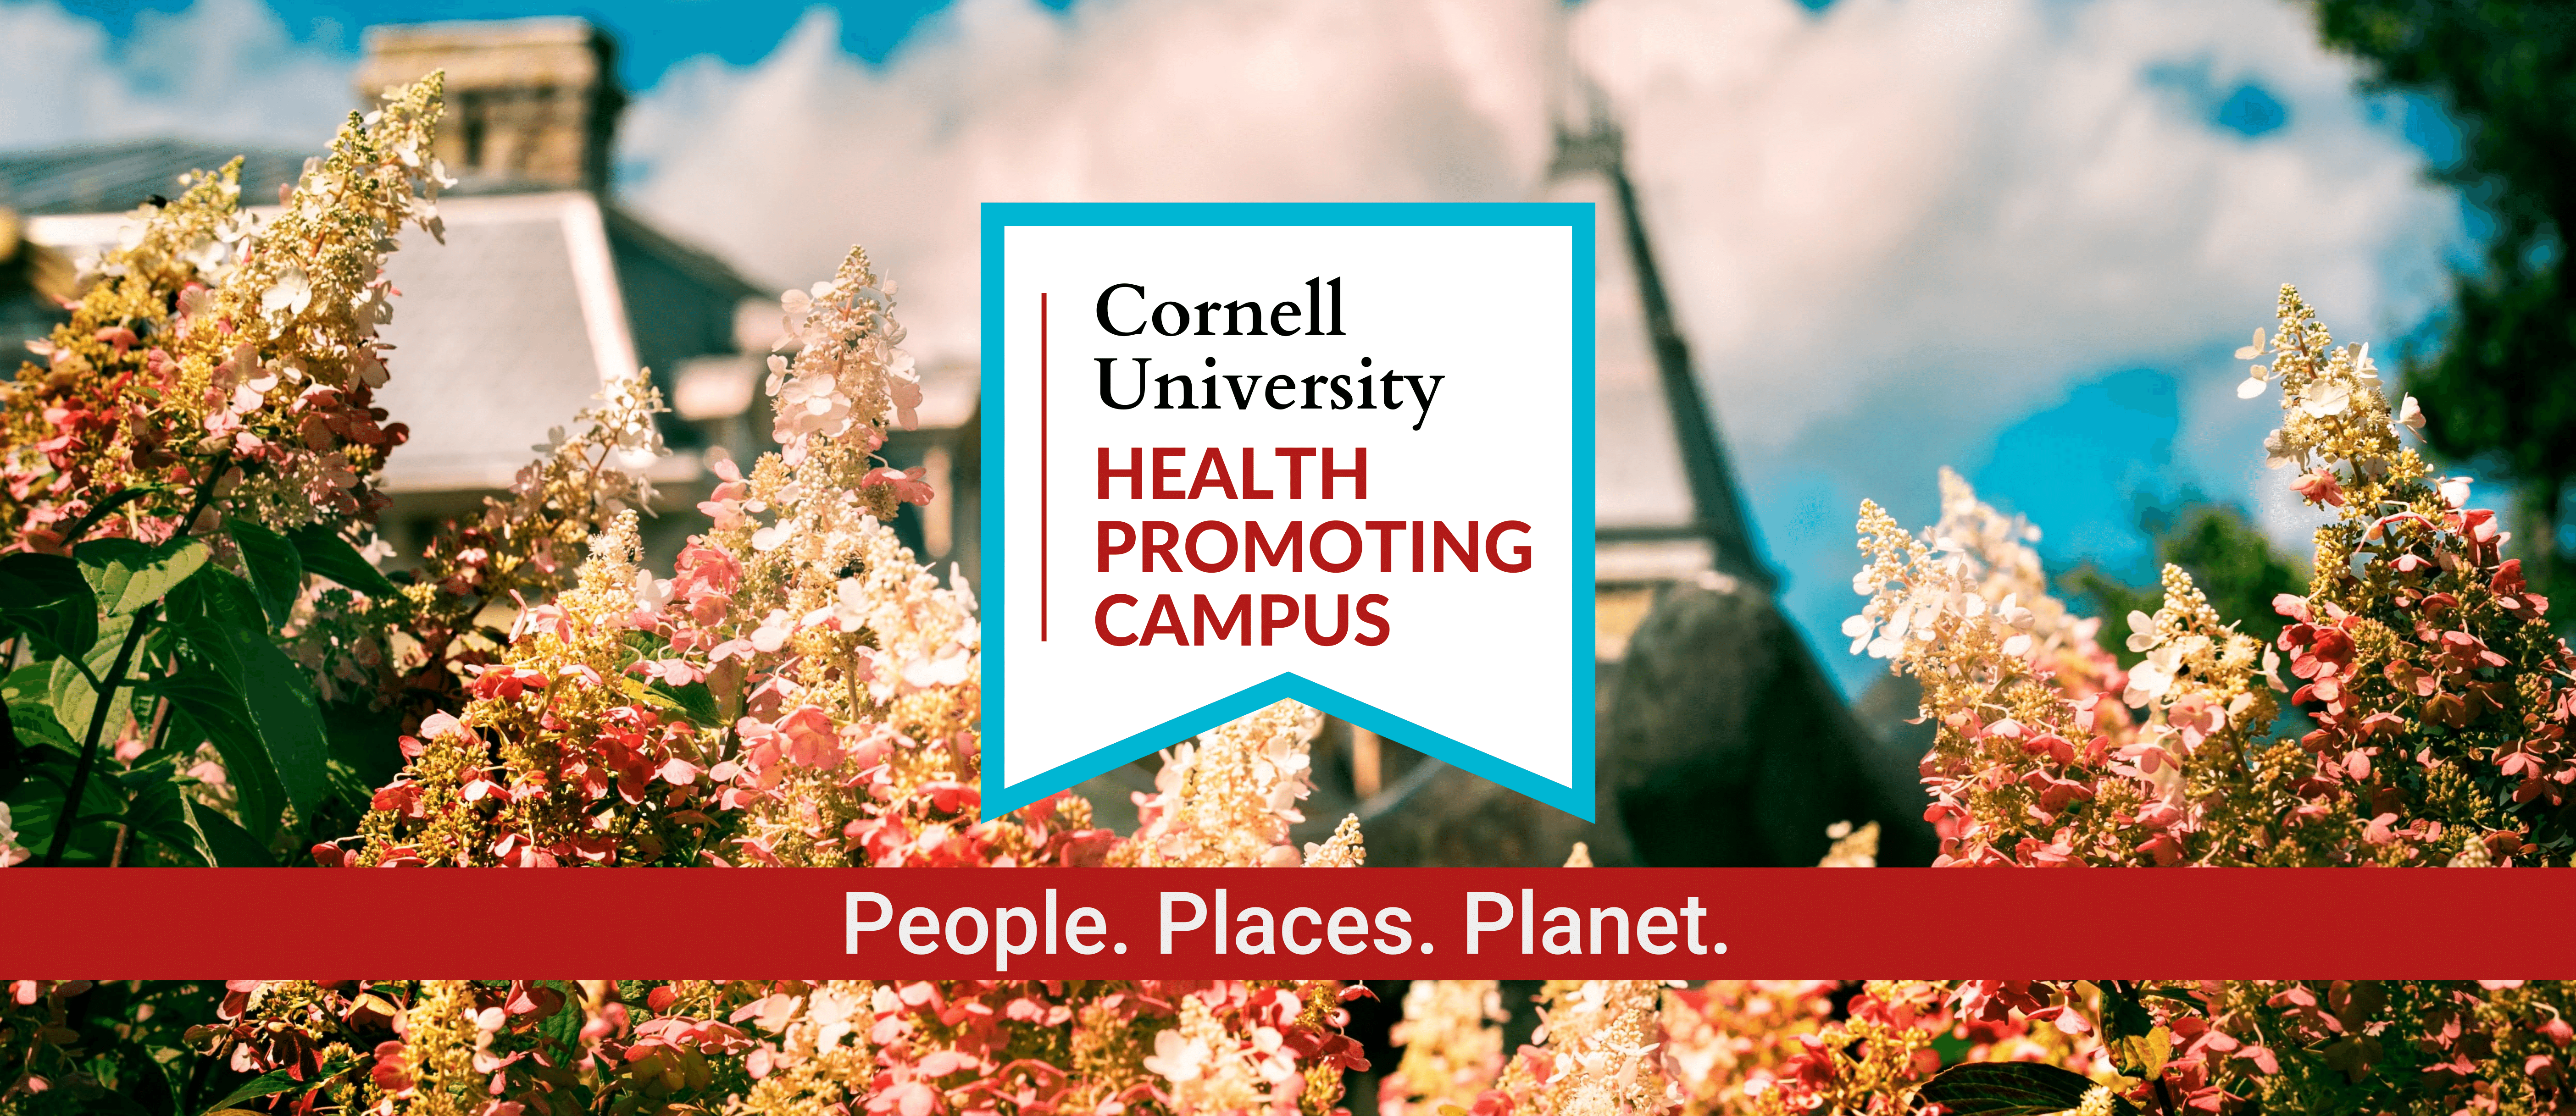 Health Promoting Campus: People. Places. Planet.